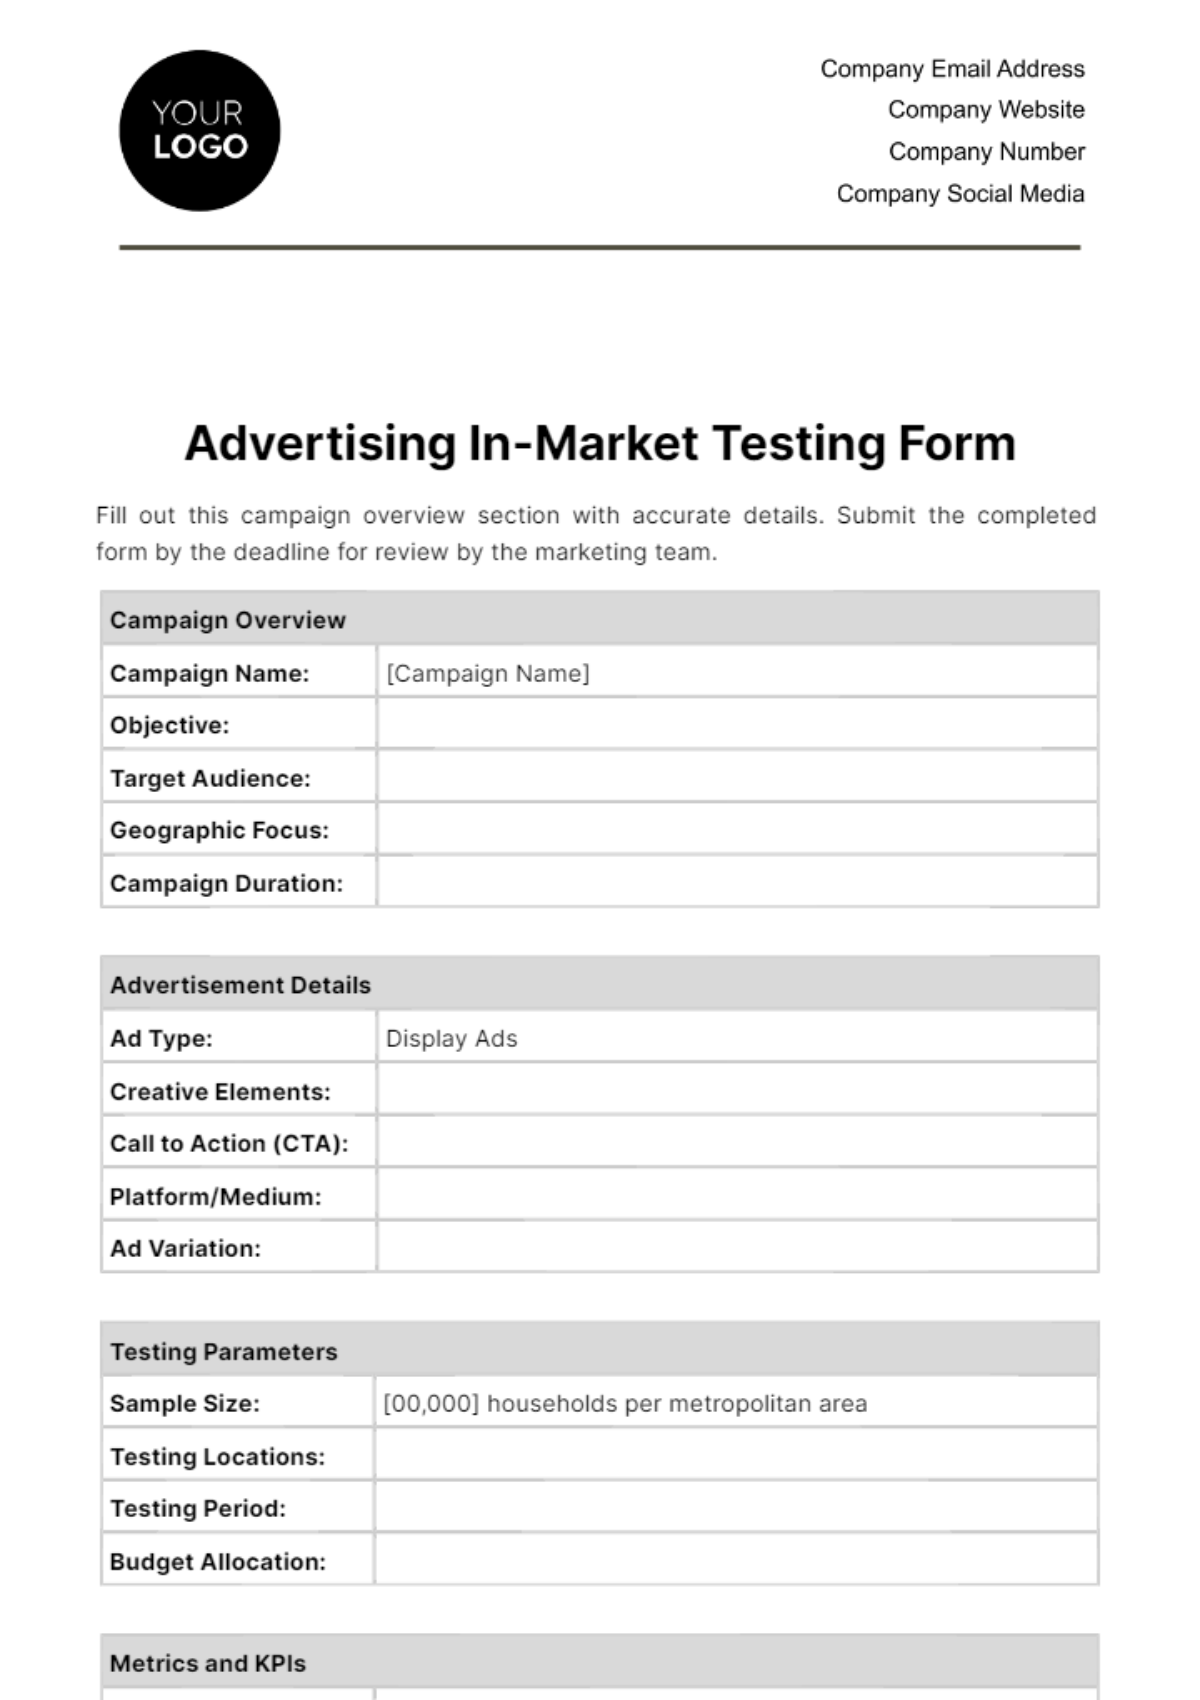 Free Advertising In-Market Testing Form Template